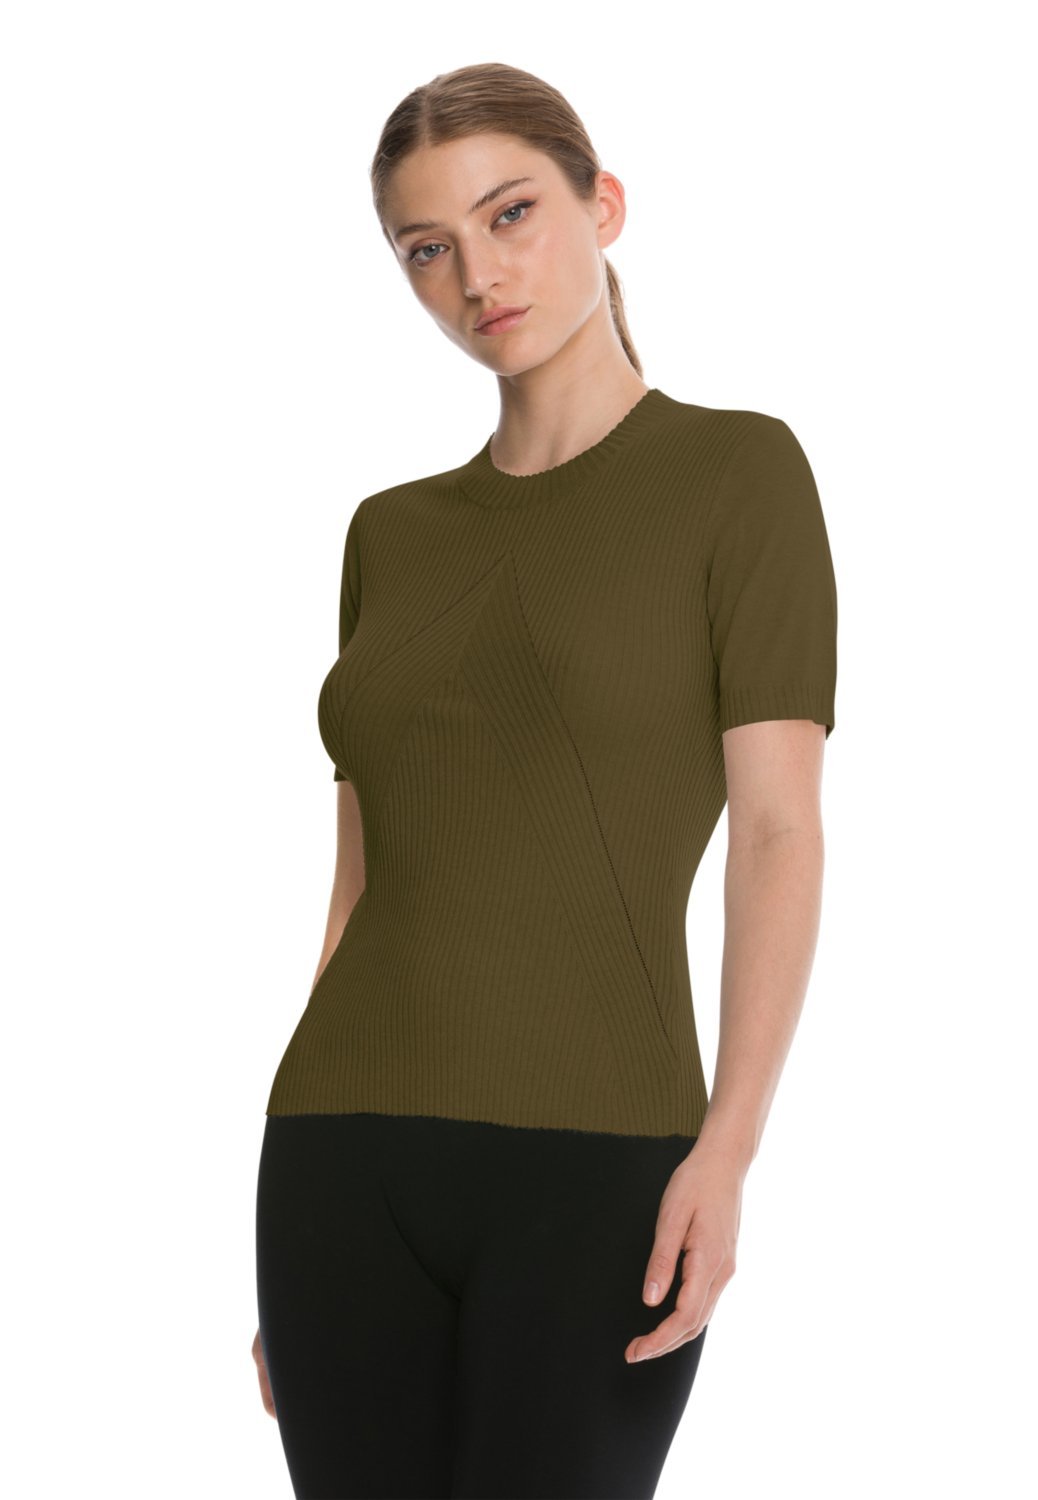 cashmere top short sleeves